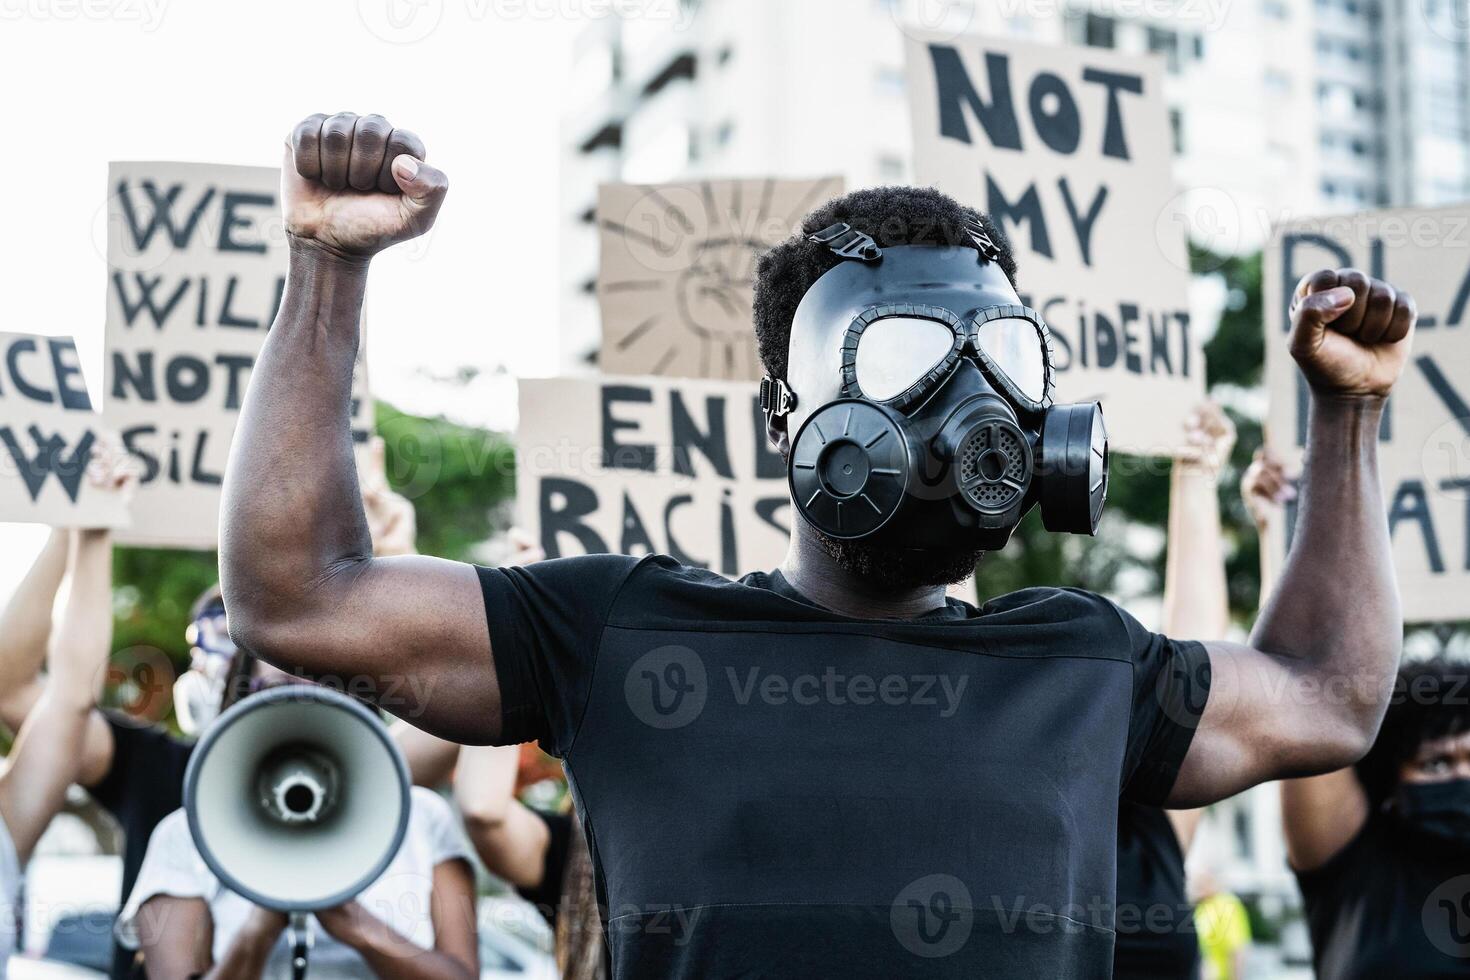 Activist wearing gas mask protesting against racism and fighting for equality - Black lives matter demonstration on street for justice and equal rights - Blm international movement concept photo